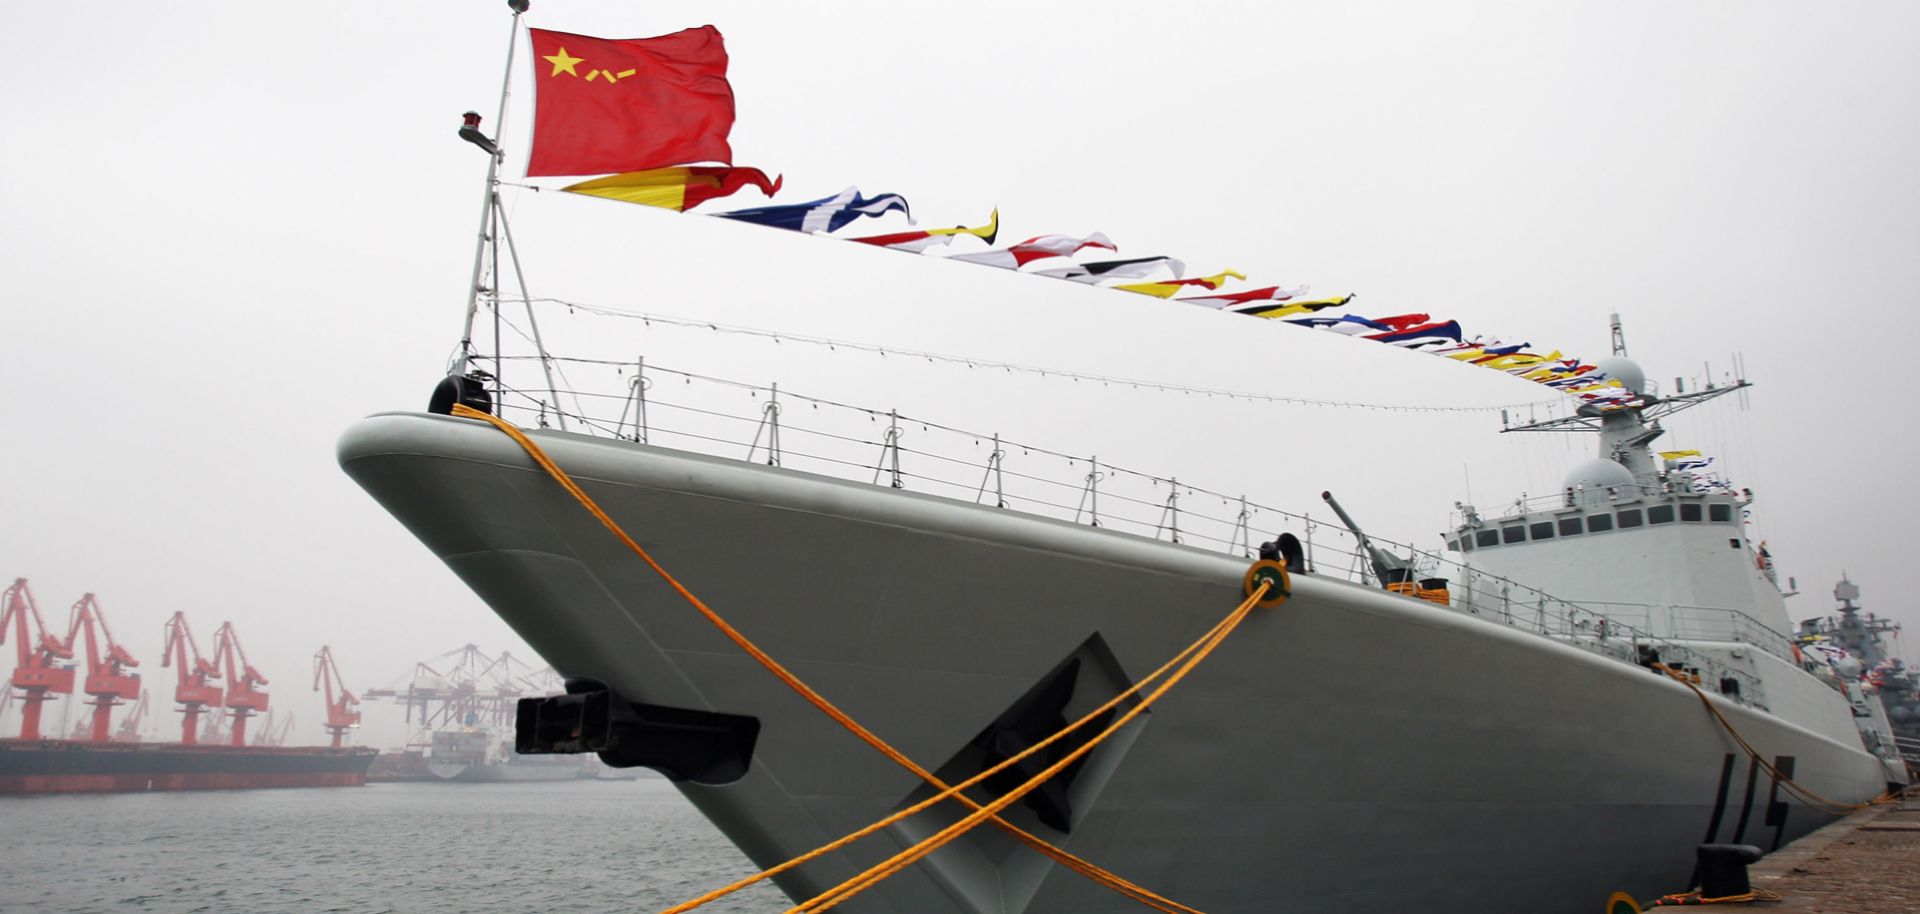 The Chinese Navy missile destroyer 115 Shenyang docks at the port of Qingdao, China, to celebrate the 60th anniversary of the founding of the People's Liberation Army Navy on April 20, 2009.